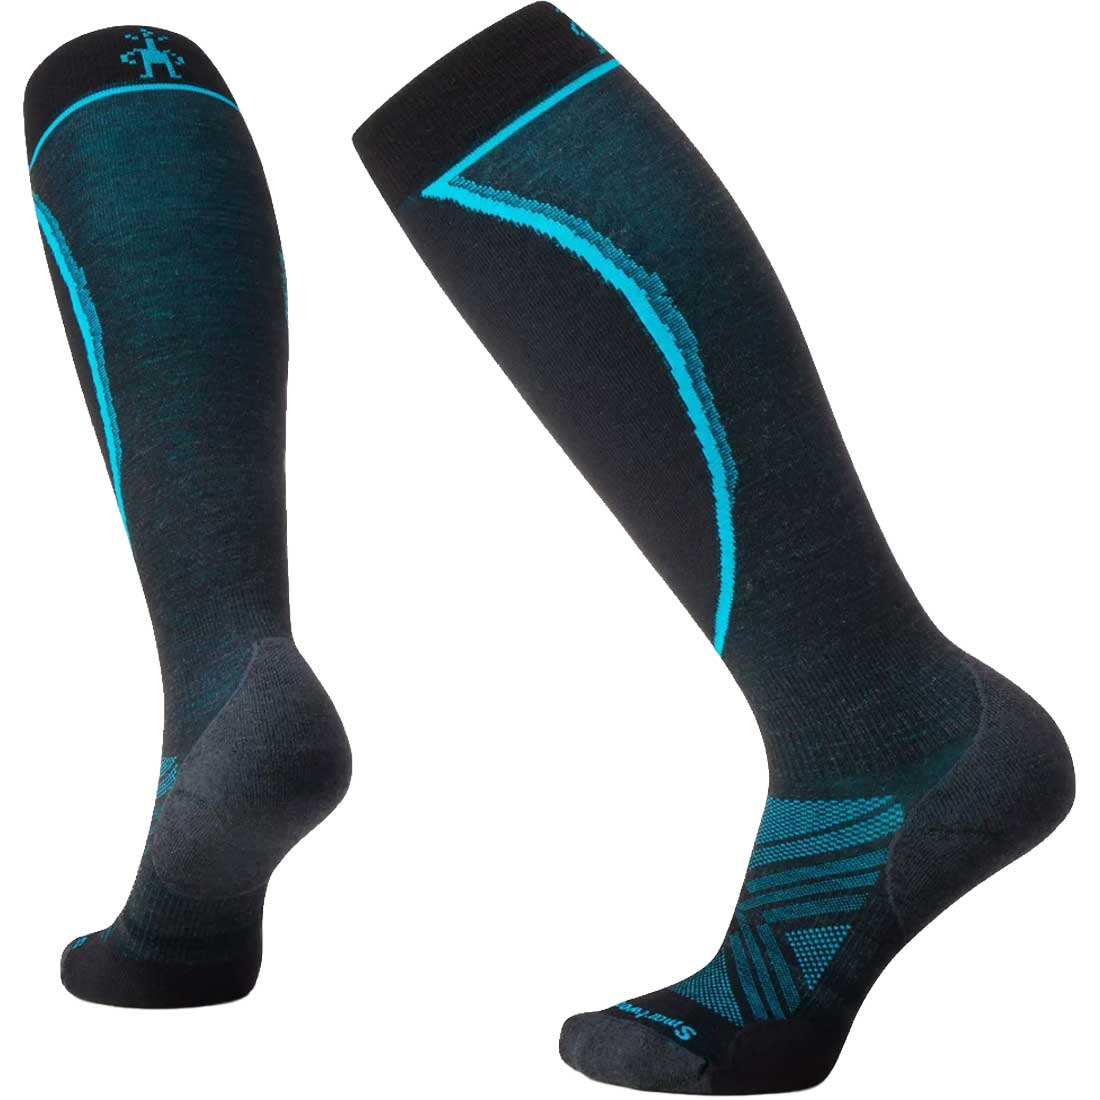 Smartwool Ski Targeted Cushion Extra Stretch Over-the-Calf Sock - Women's